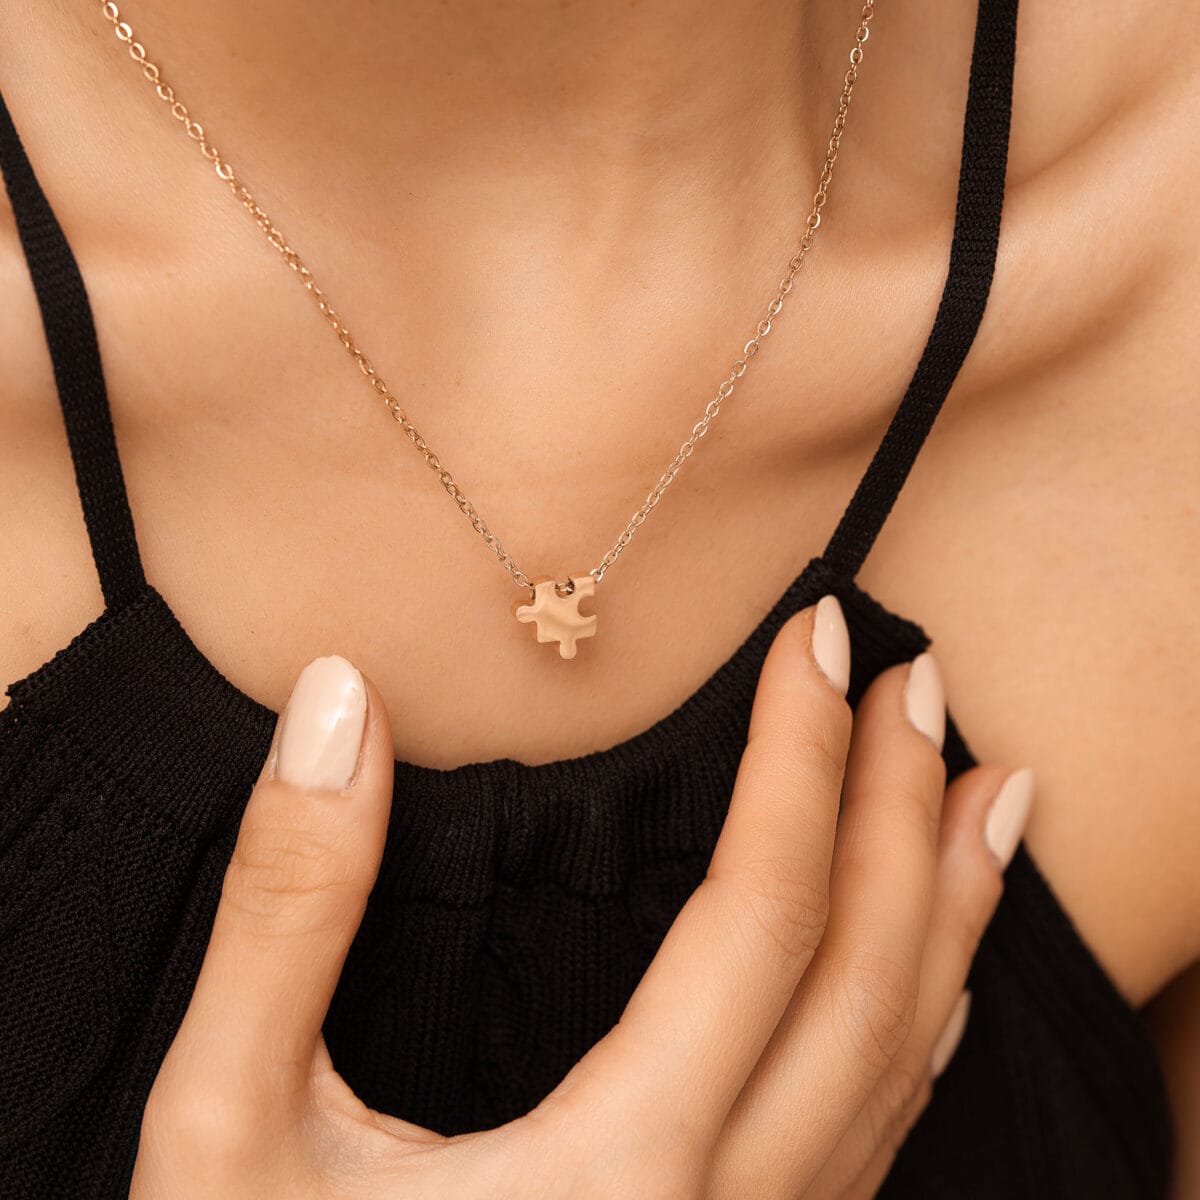 https://m.clubbella.co/product/duna-rose-gold-puzzle-charm-necklace/ Duna Puzzle Rose Gold Charm Necklace (1)